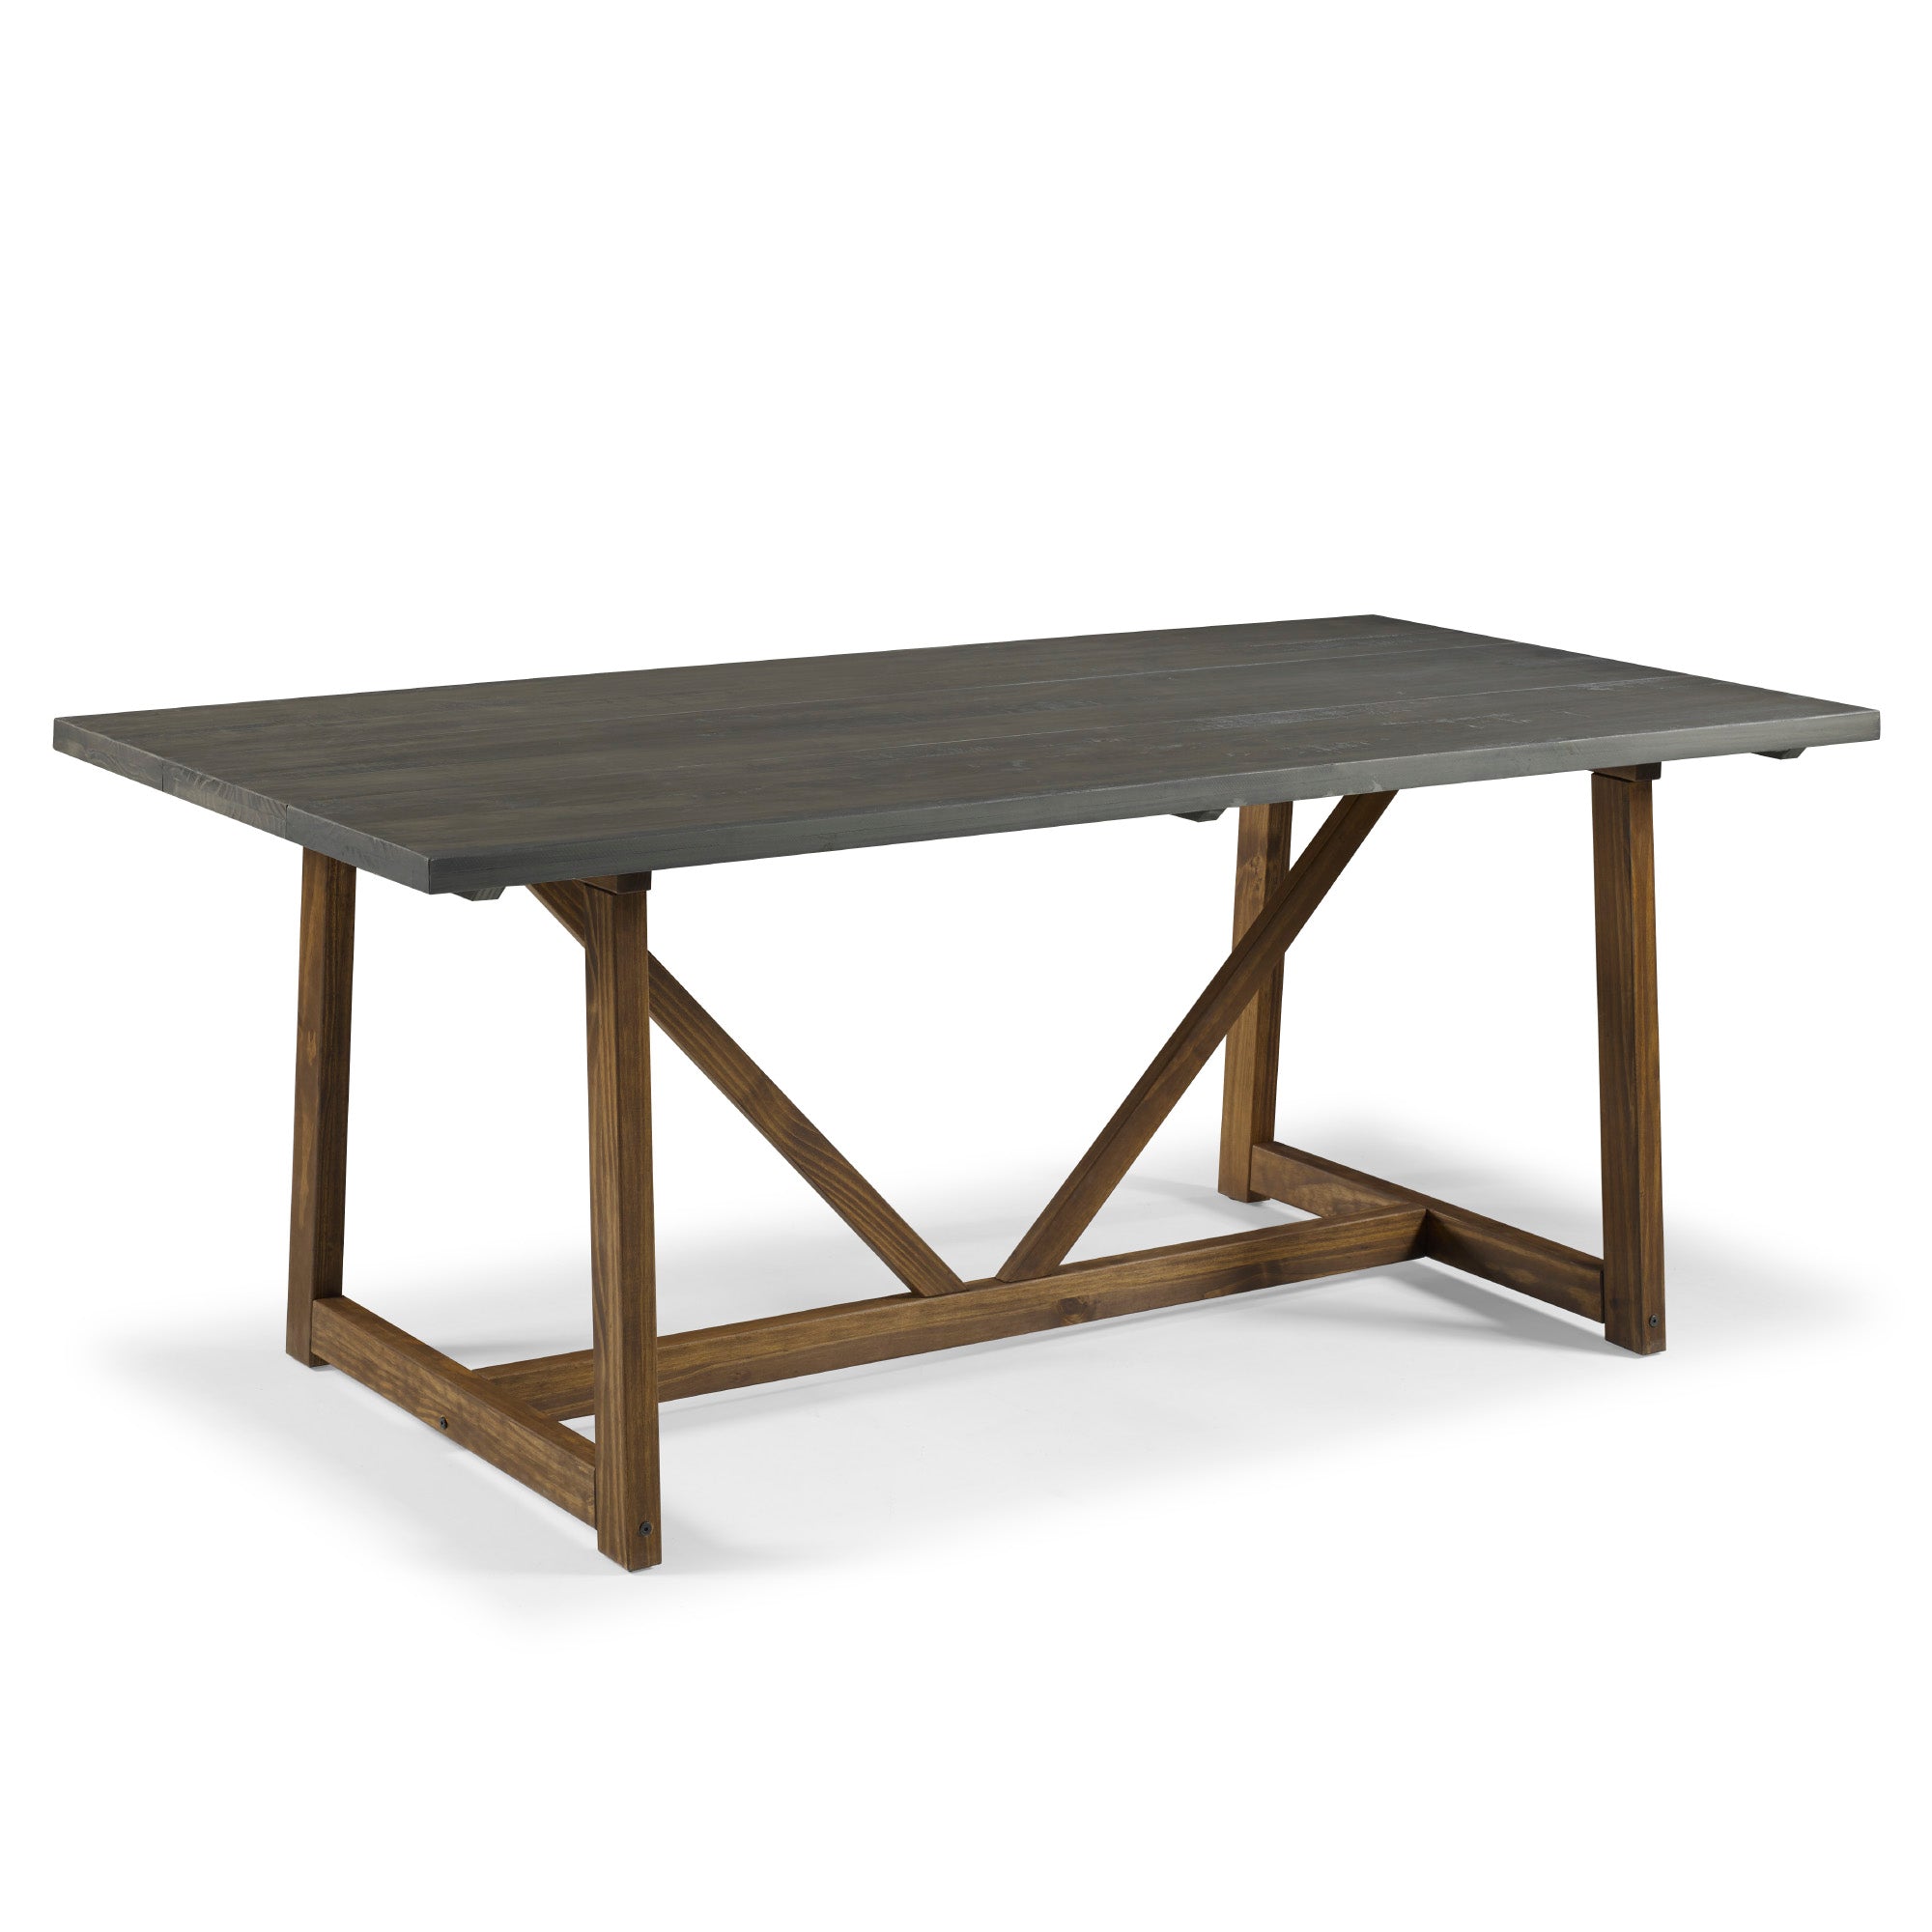 Brennan 72" Solid Wood Trestle Dining Table - East Shore Modern Home Furnishings